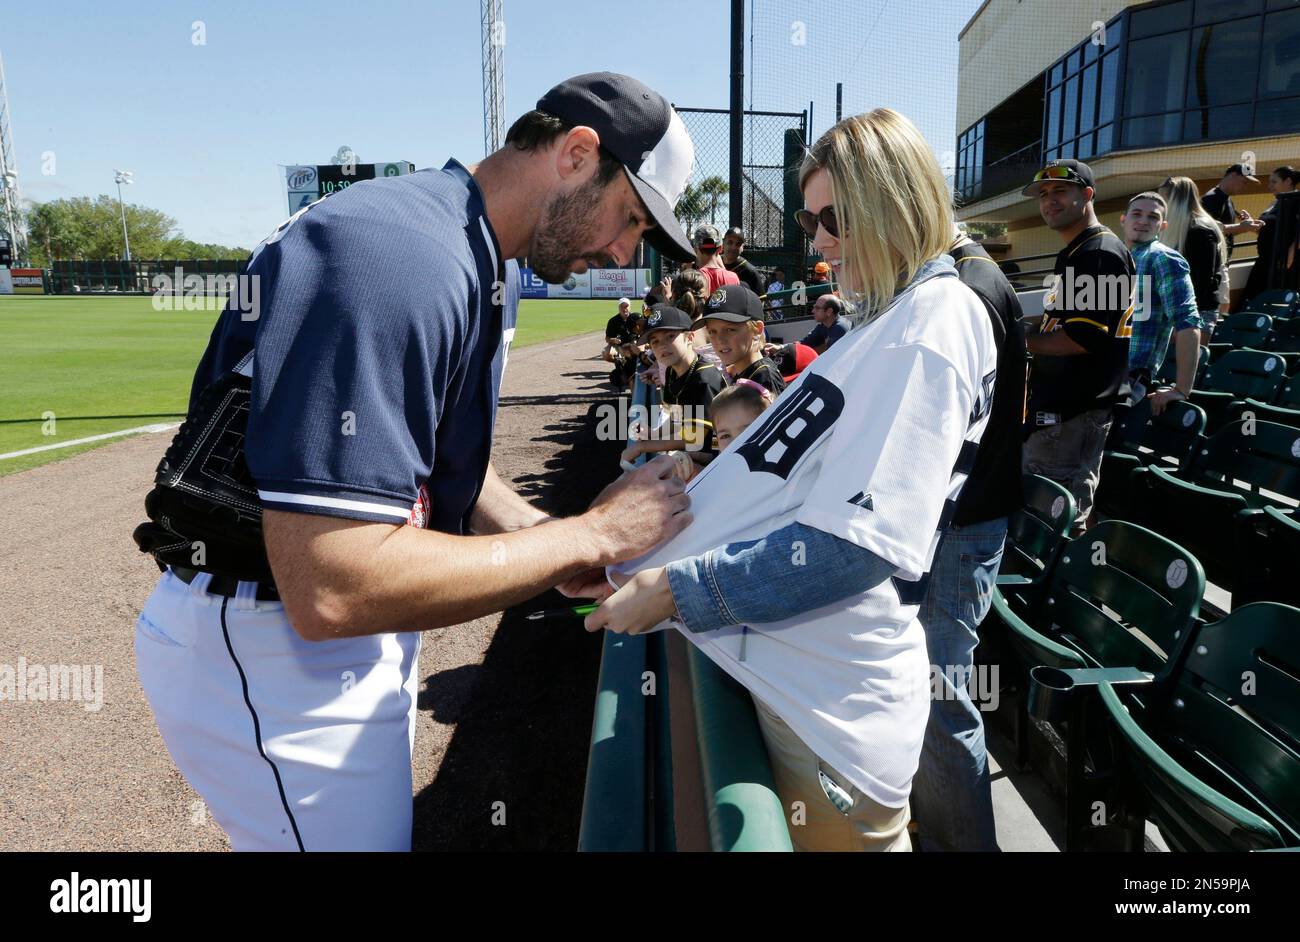 Detroit Tigers pitcher Justin Verlander signs the jersey of B